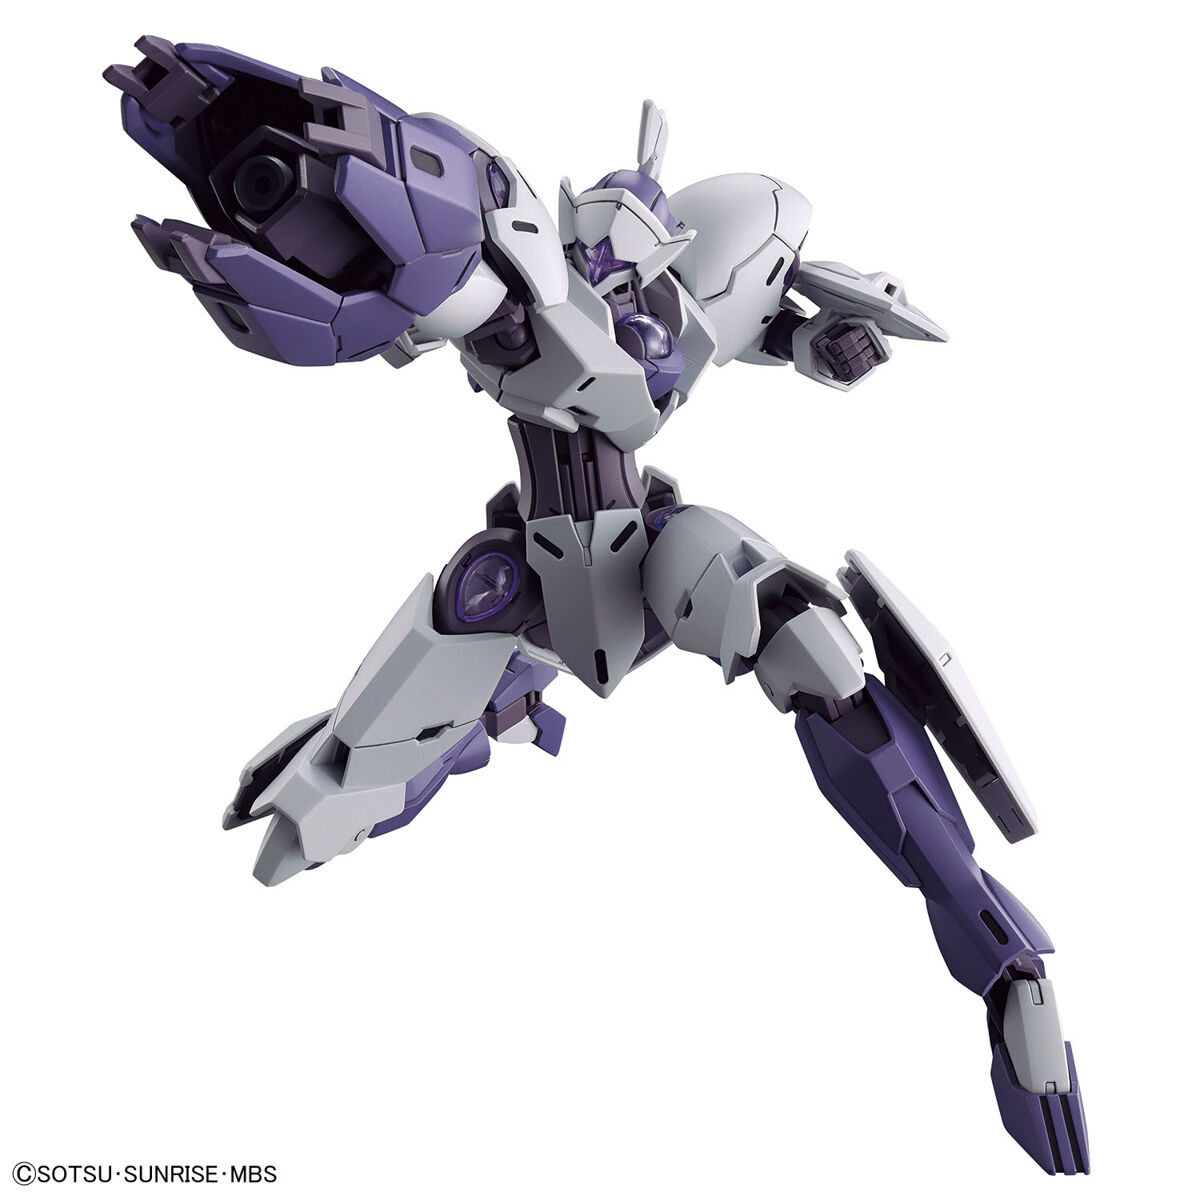 HG Michaelis (Mobile Suit Gundam: The Witch from Mercury)